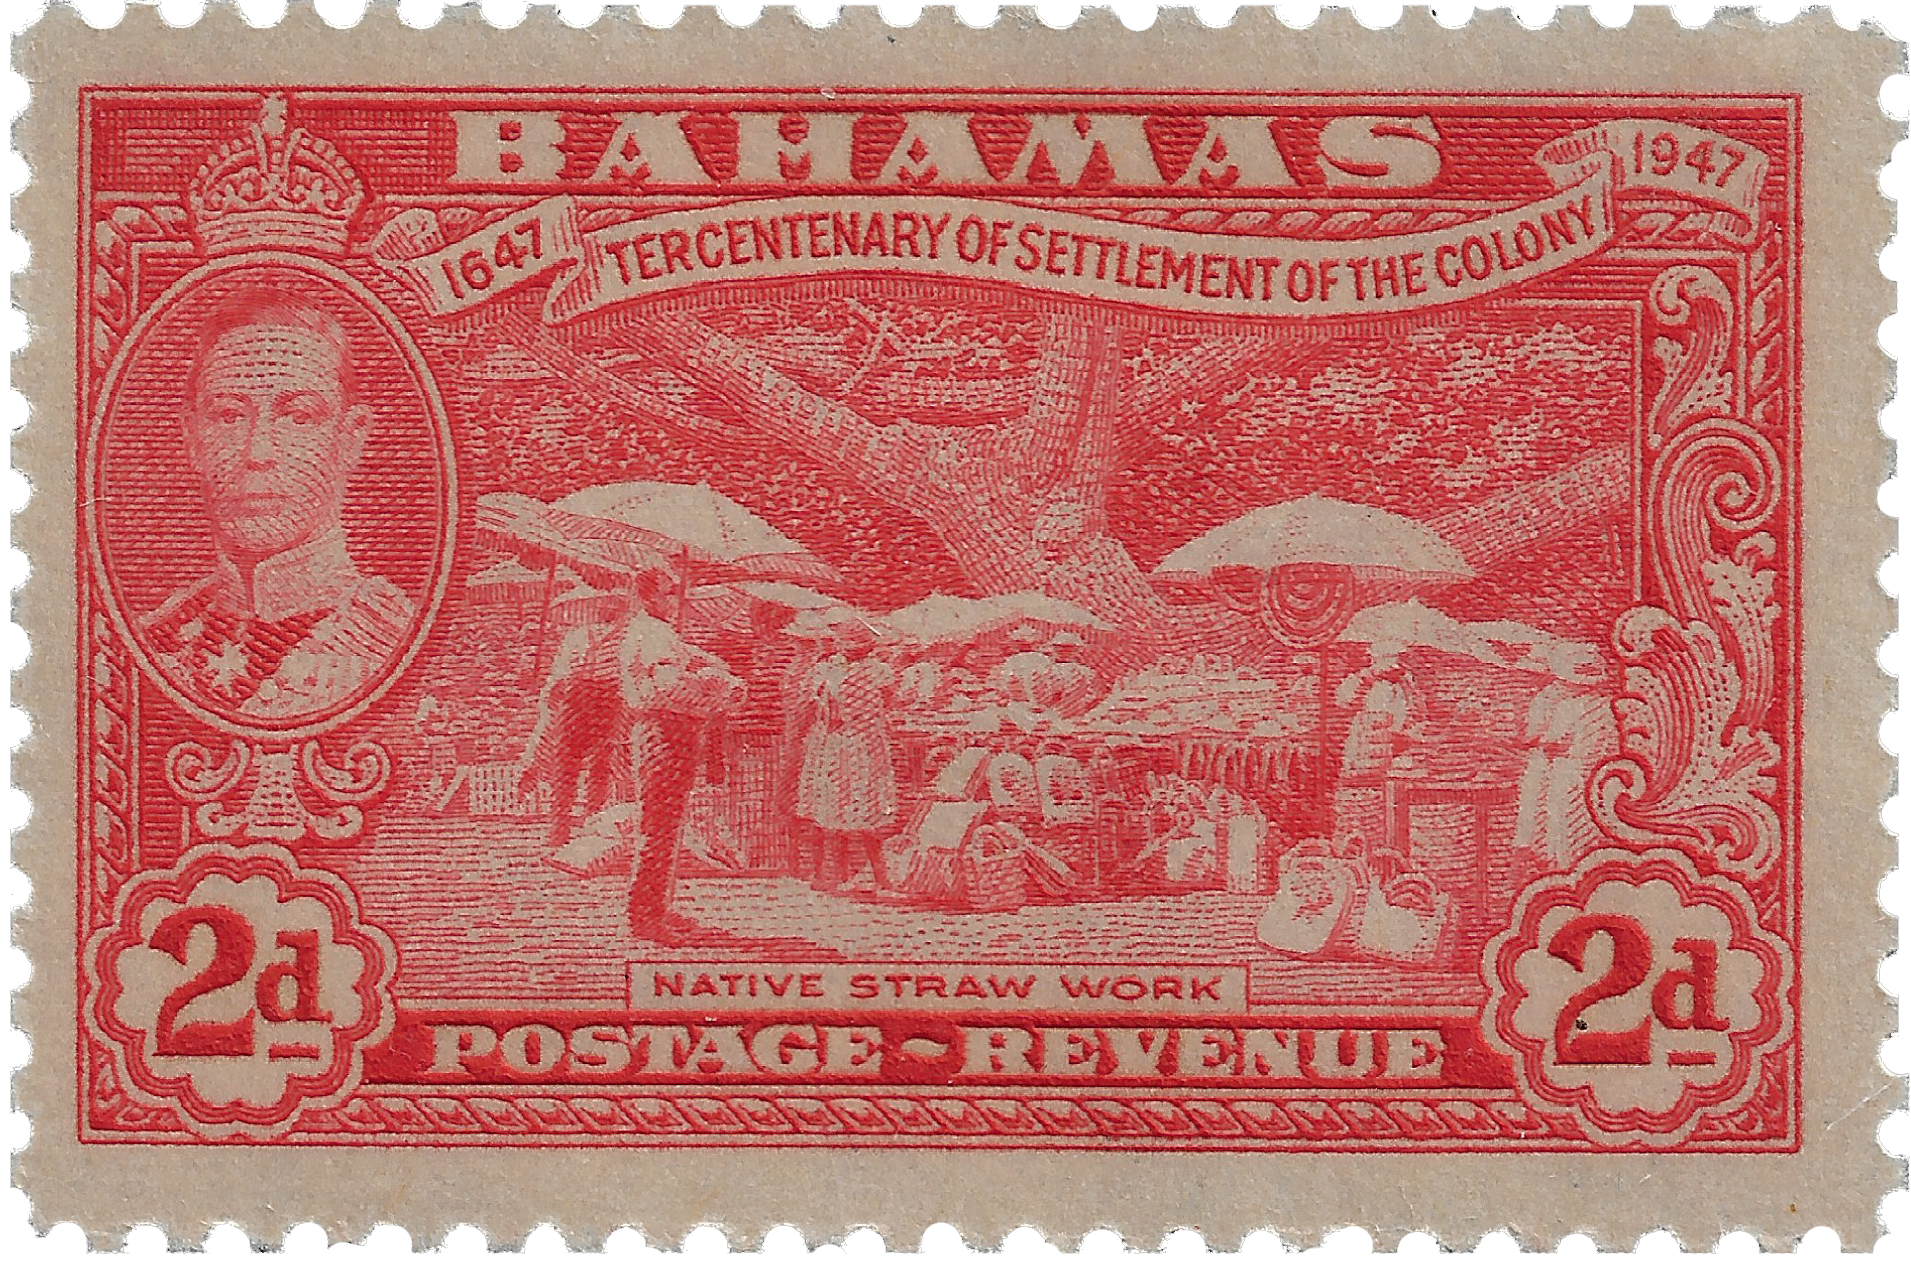 2d 1948, 1647 Tercentenary of Settlement of the Colony, Native Straw Work